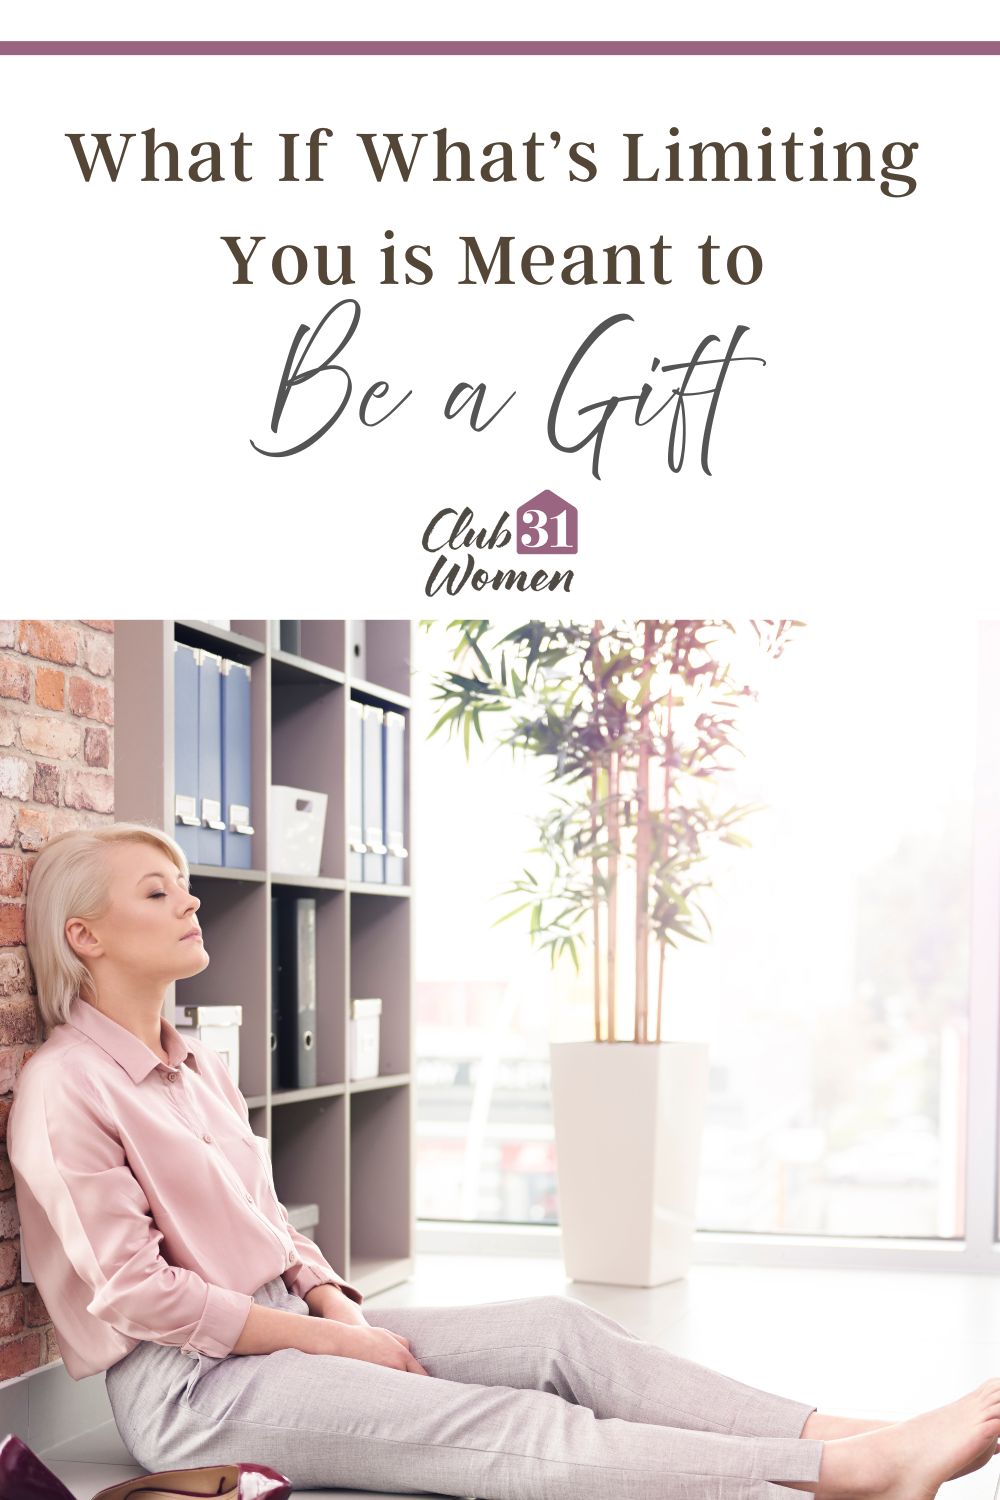 Why do we feel that what's limiting to us is a bad thing? Maybe it's a way of remembering we don't need to be all things all the time. via @Club31Women